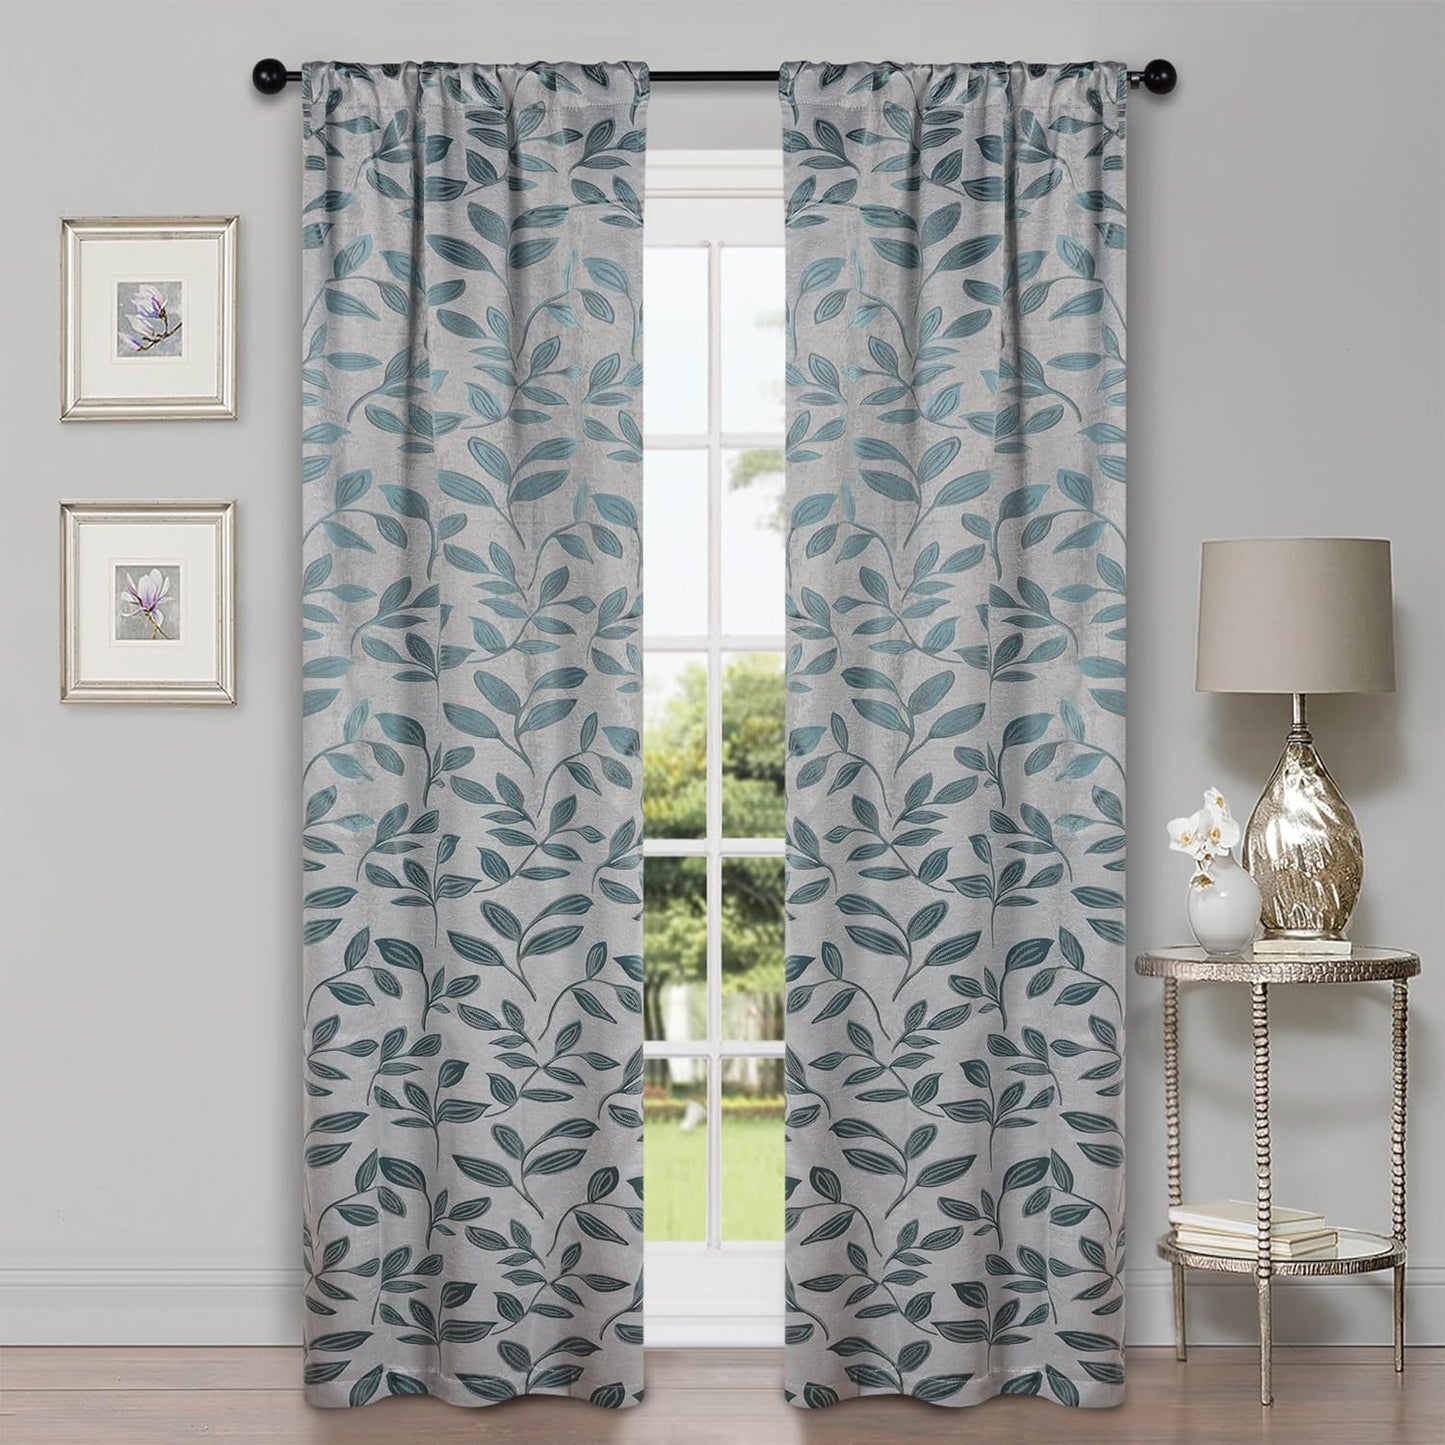 Superior Blackout Curtains, Room Darkening Window Accent for Bedroom, Sun Blocking, Thermal, Modern Bohemian Curtains, Leaves Collection, Set of 2 Panels, Rod Pocket - 52 in X 63 In, Nickel Black  Home City Inc. Teal 26 In X 84 In (W X L) 